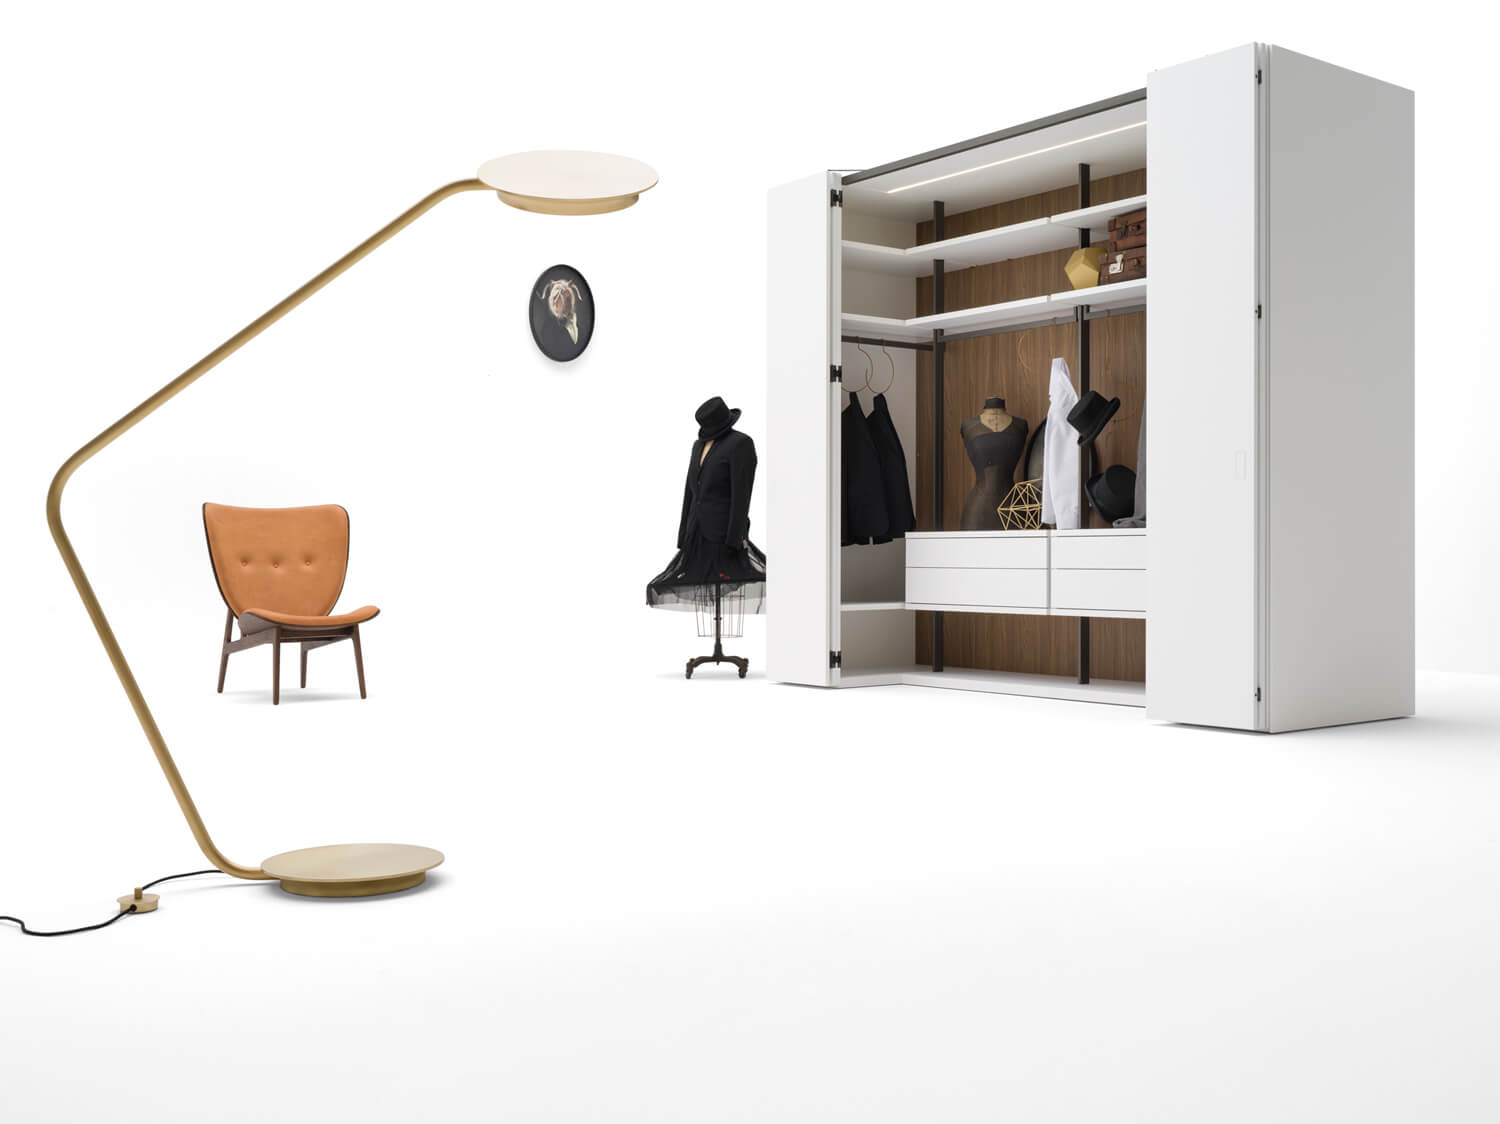 Camerino combines the compact efficiency of a closed closet with the functionality of a walk-in closet where every area is easy to access and even the sides are fully utilized.